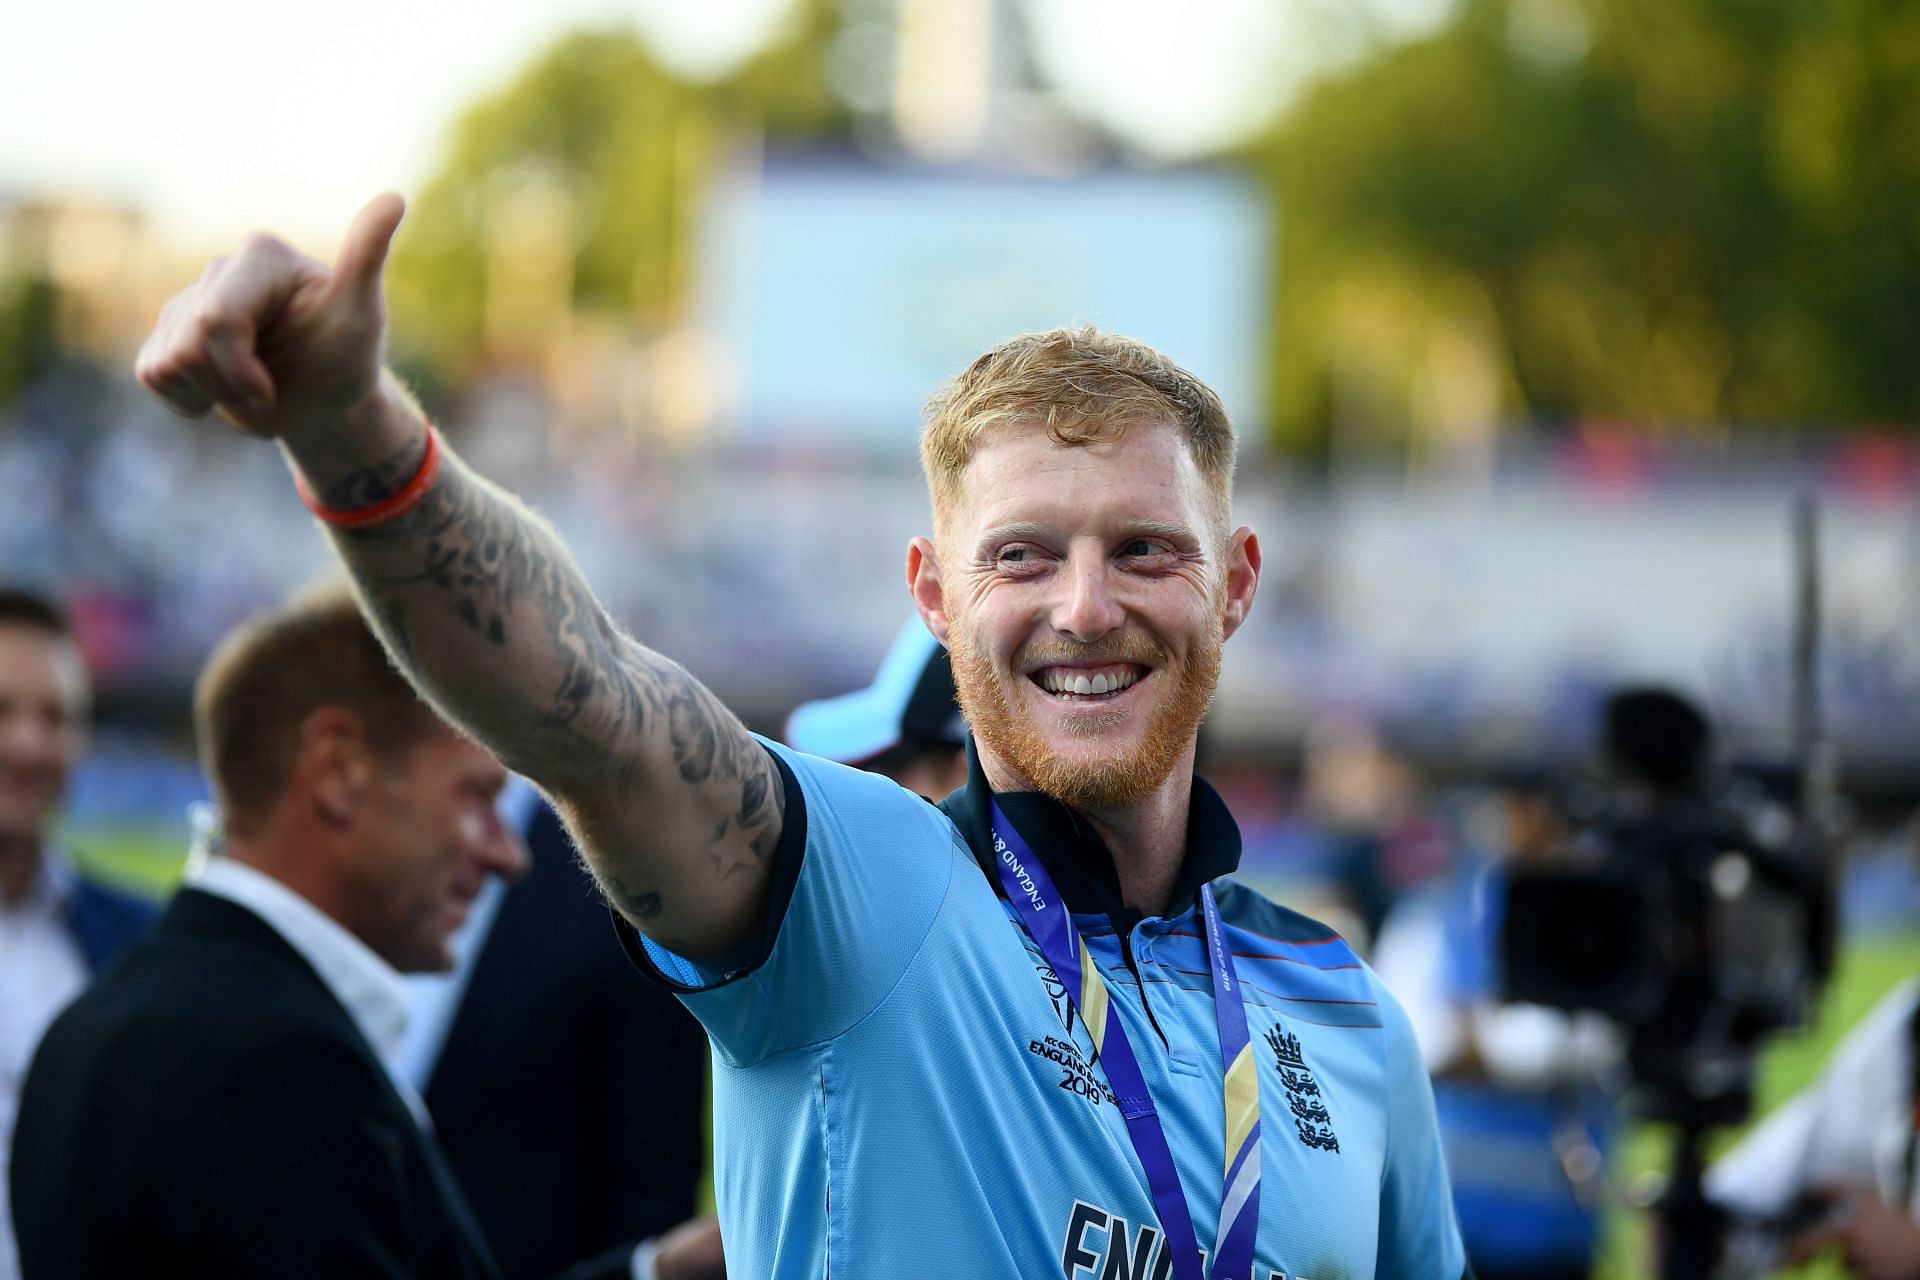 Stokes&#039; innings in the 2019 World Cup final at Lord&#039;s helped England win the World Cup for the first time